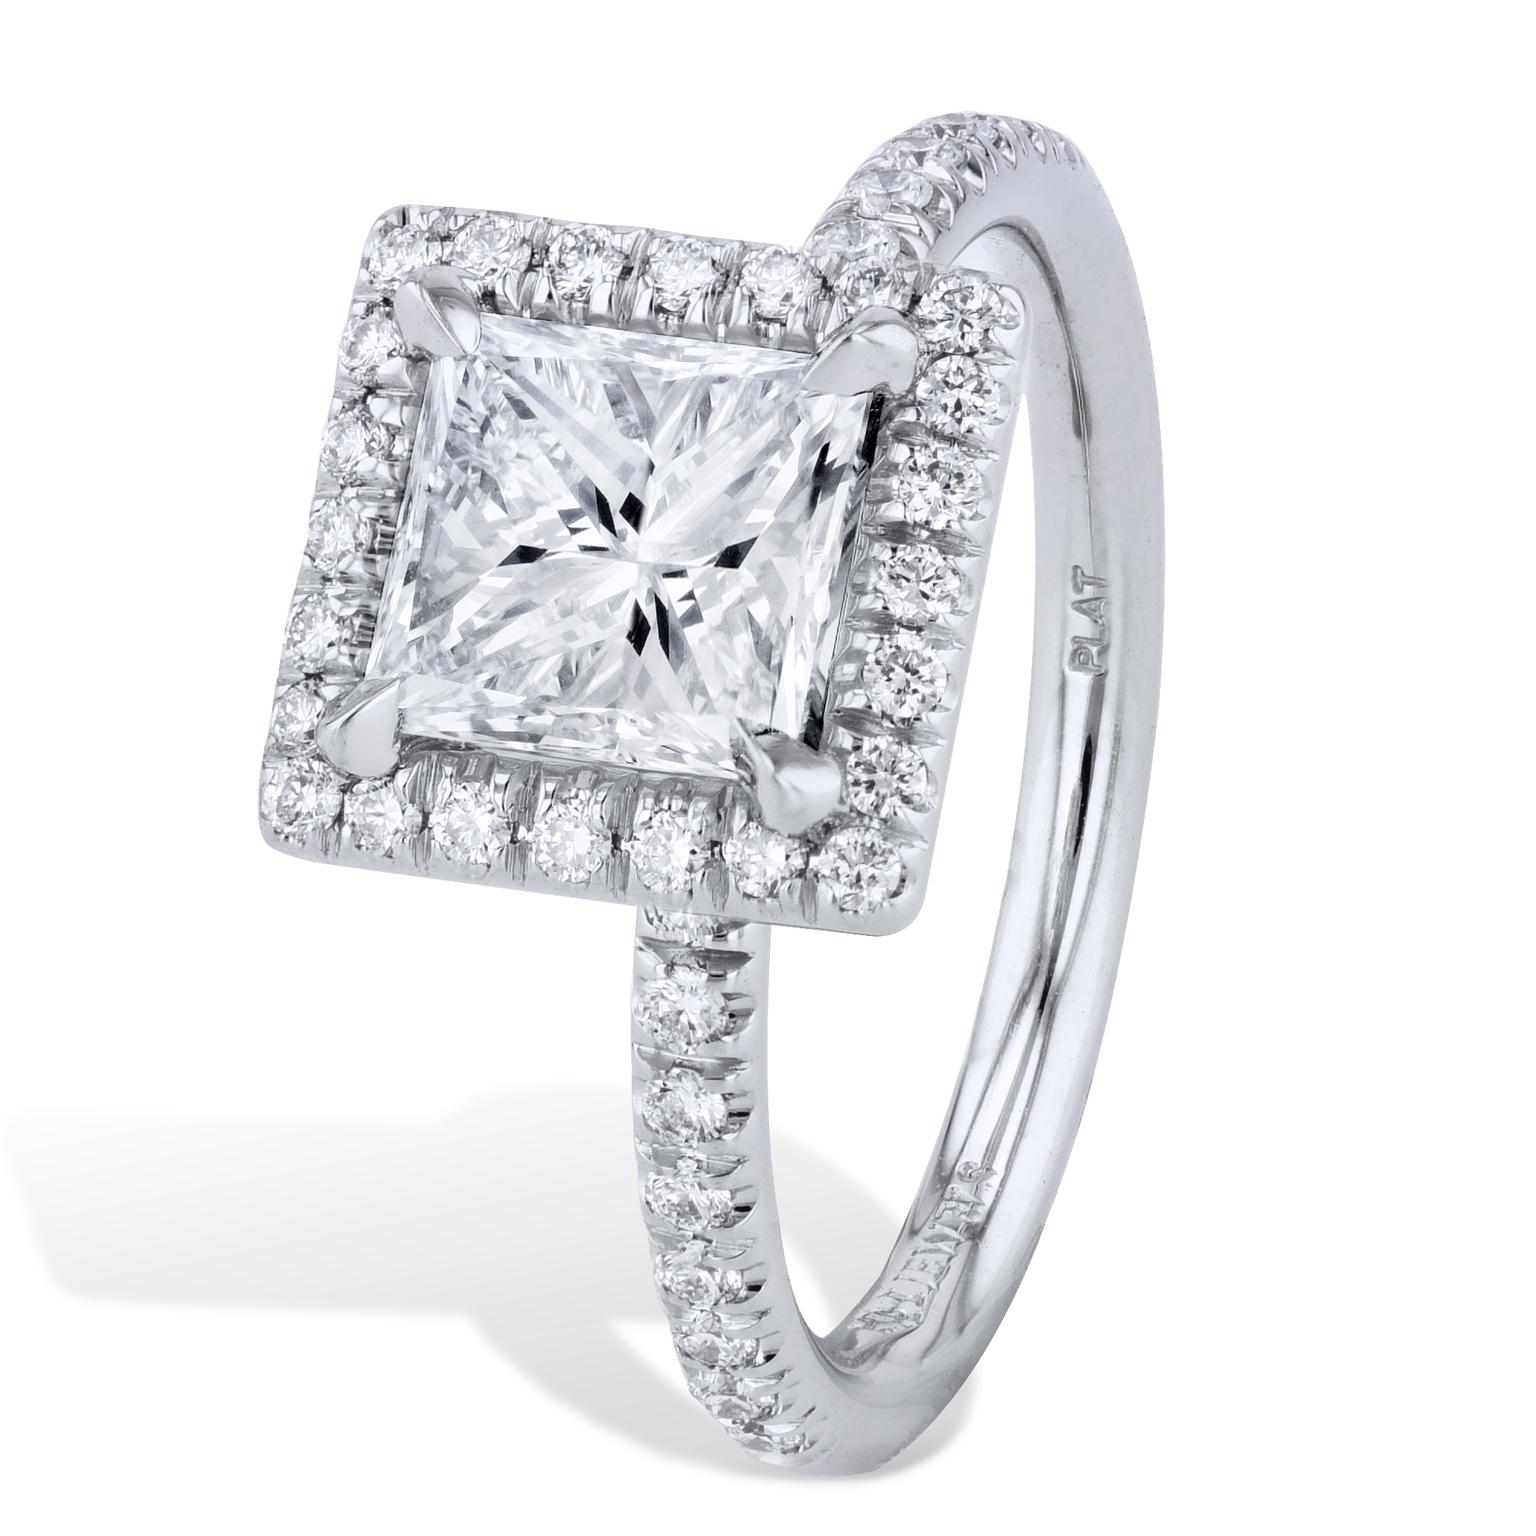 GIA Certified 1.56 Carat Princess Cut Diamond with a Pave Halo Engagement Ring

Feel like a princess wearing this 1.56 carat princess cut diamond ring (H – VVS2, VG VG), featuring a total weight of .32 carats of pave set diamonds in a beautiful halo